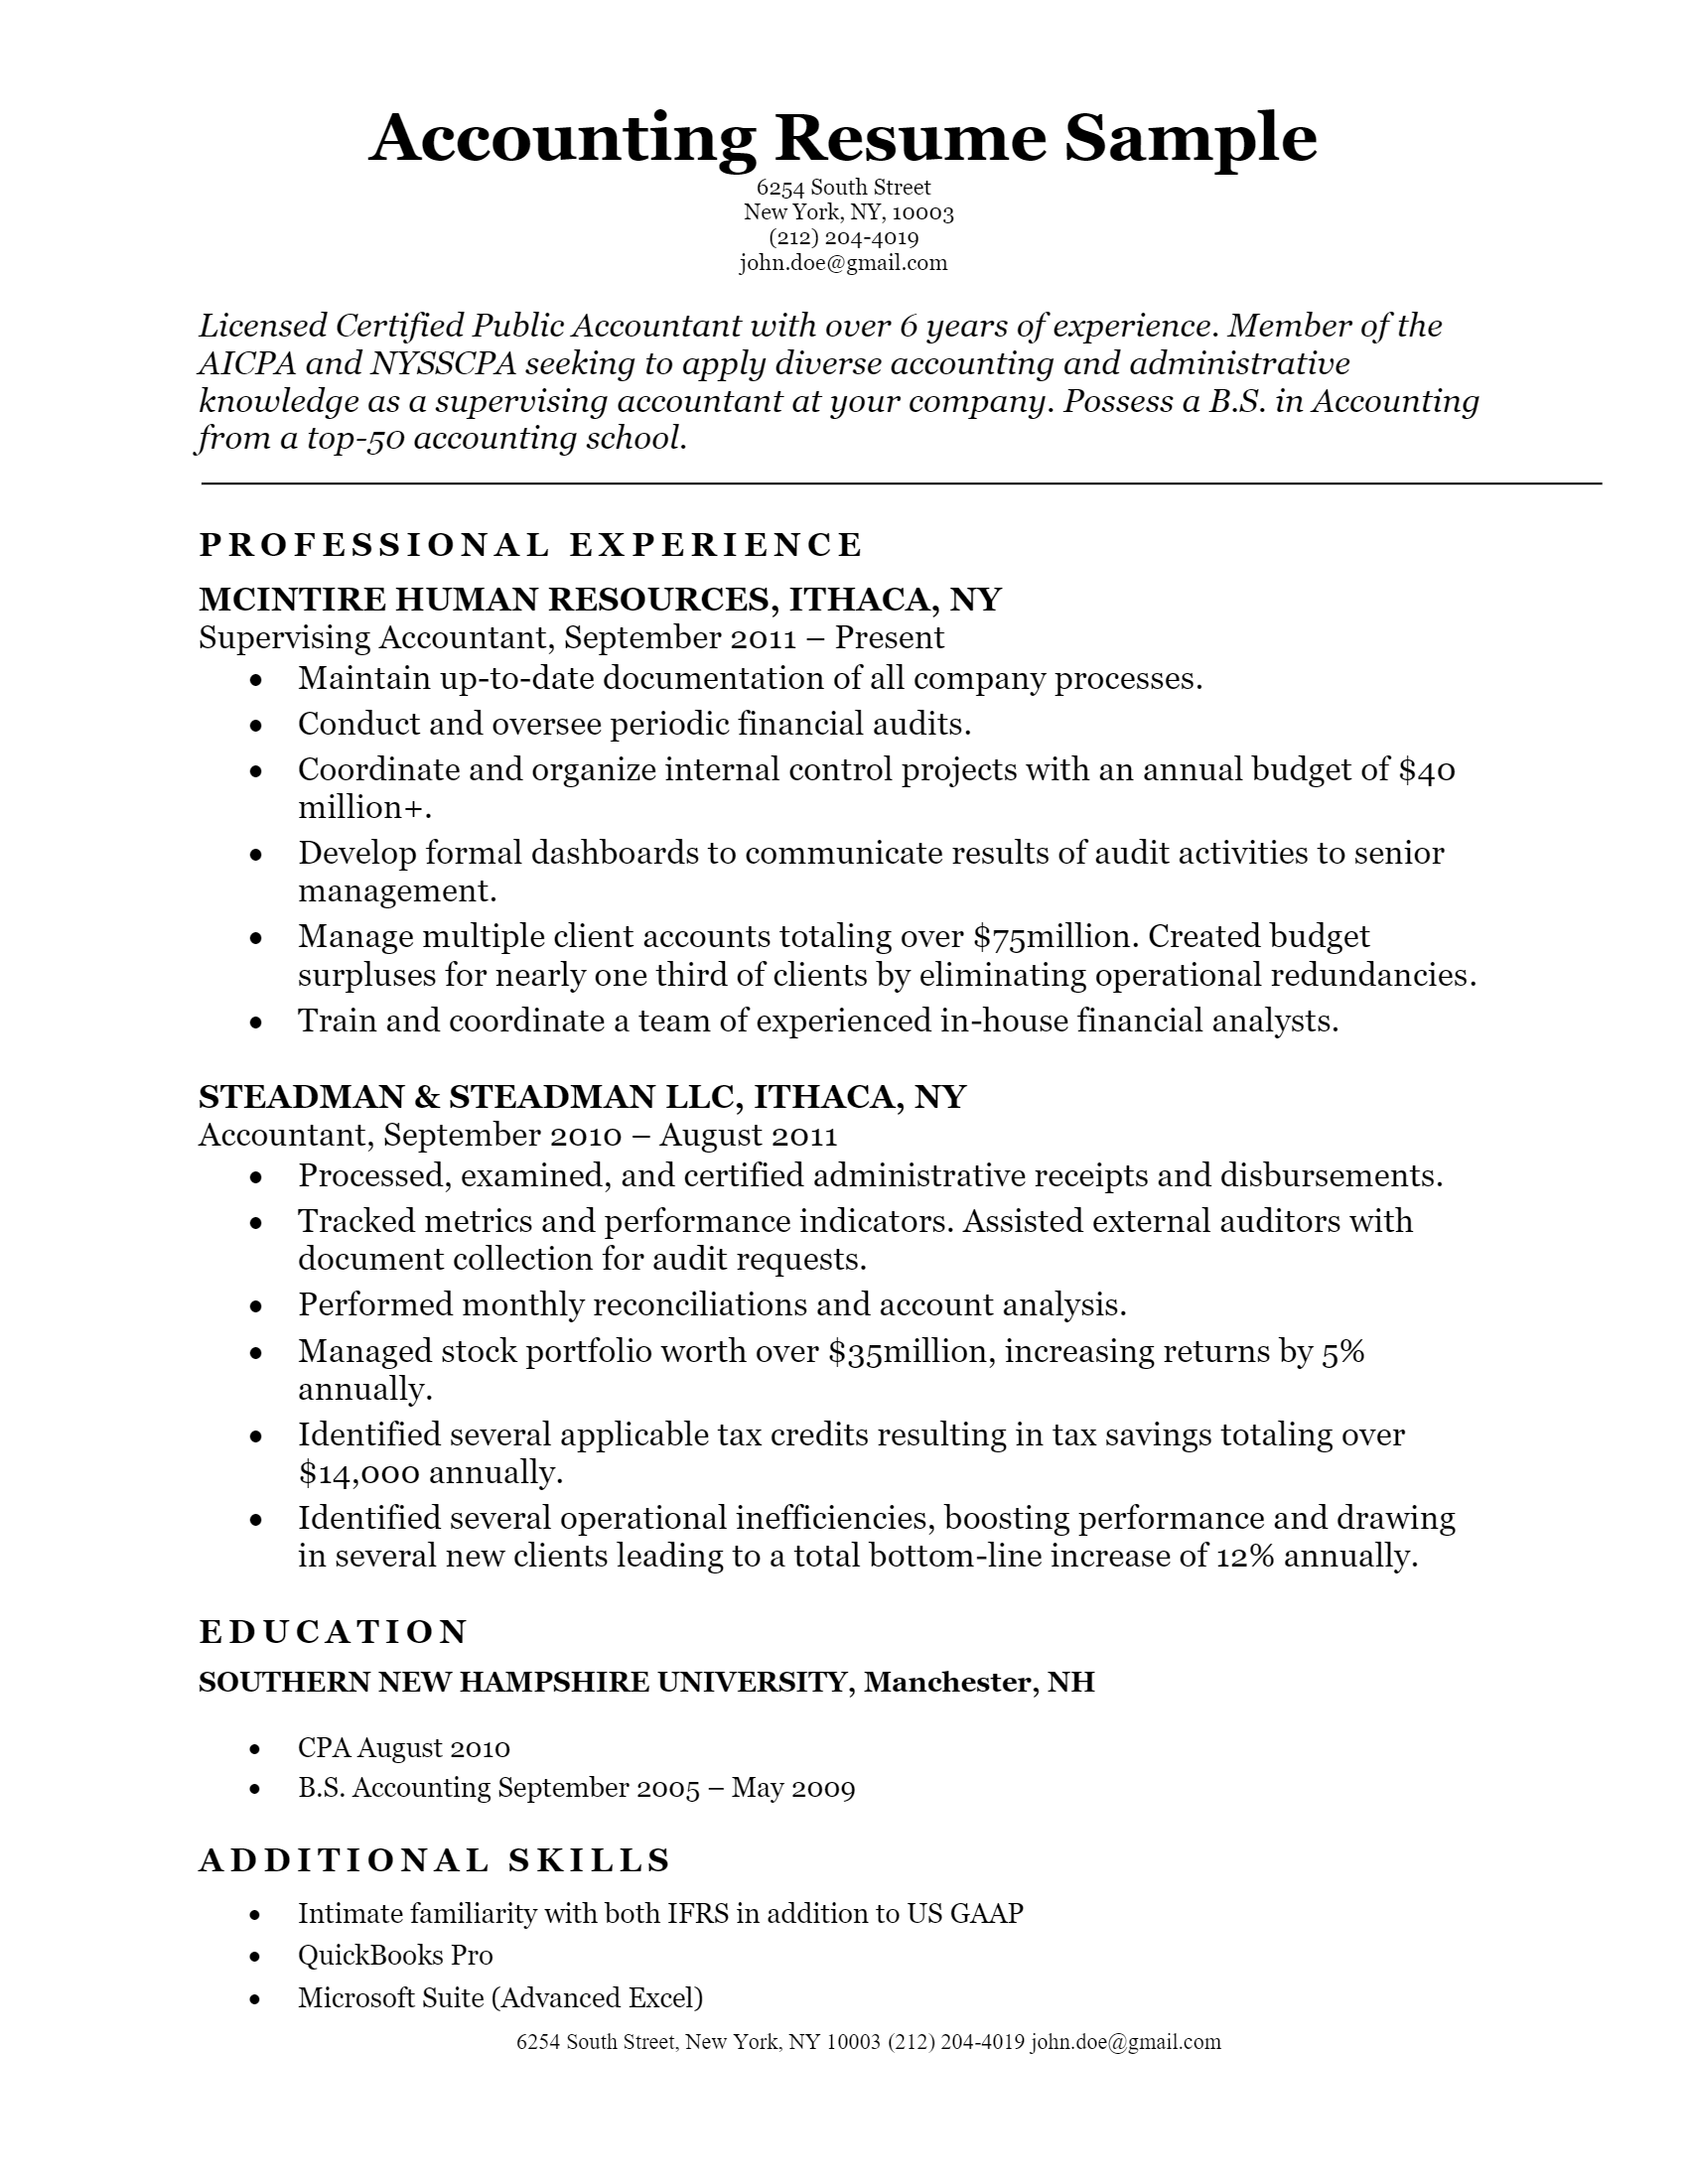 resume template word accounting